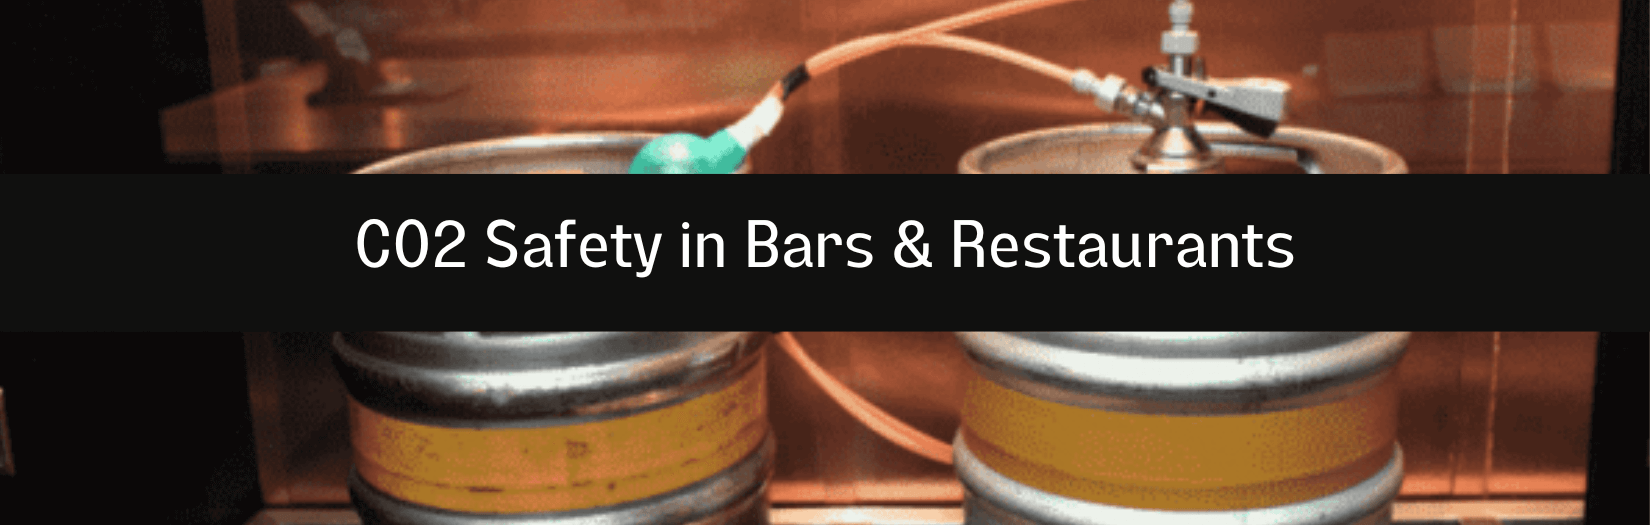 co2 safety in bars and restaurants